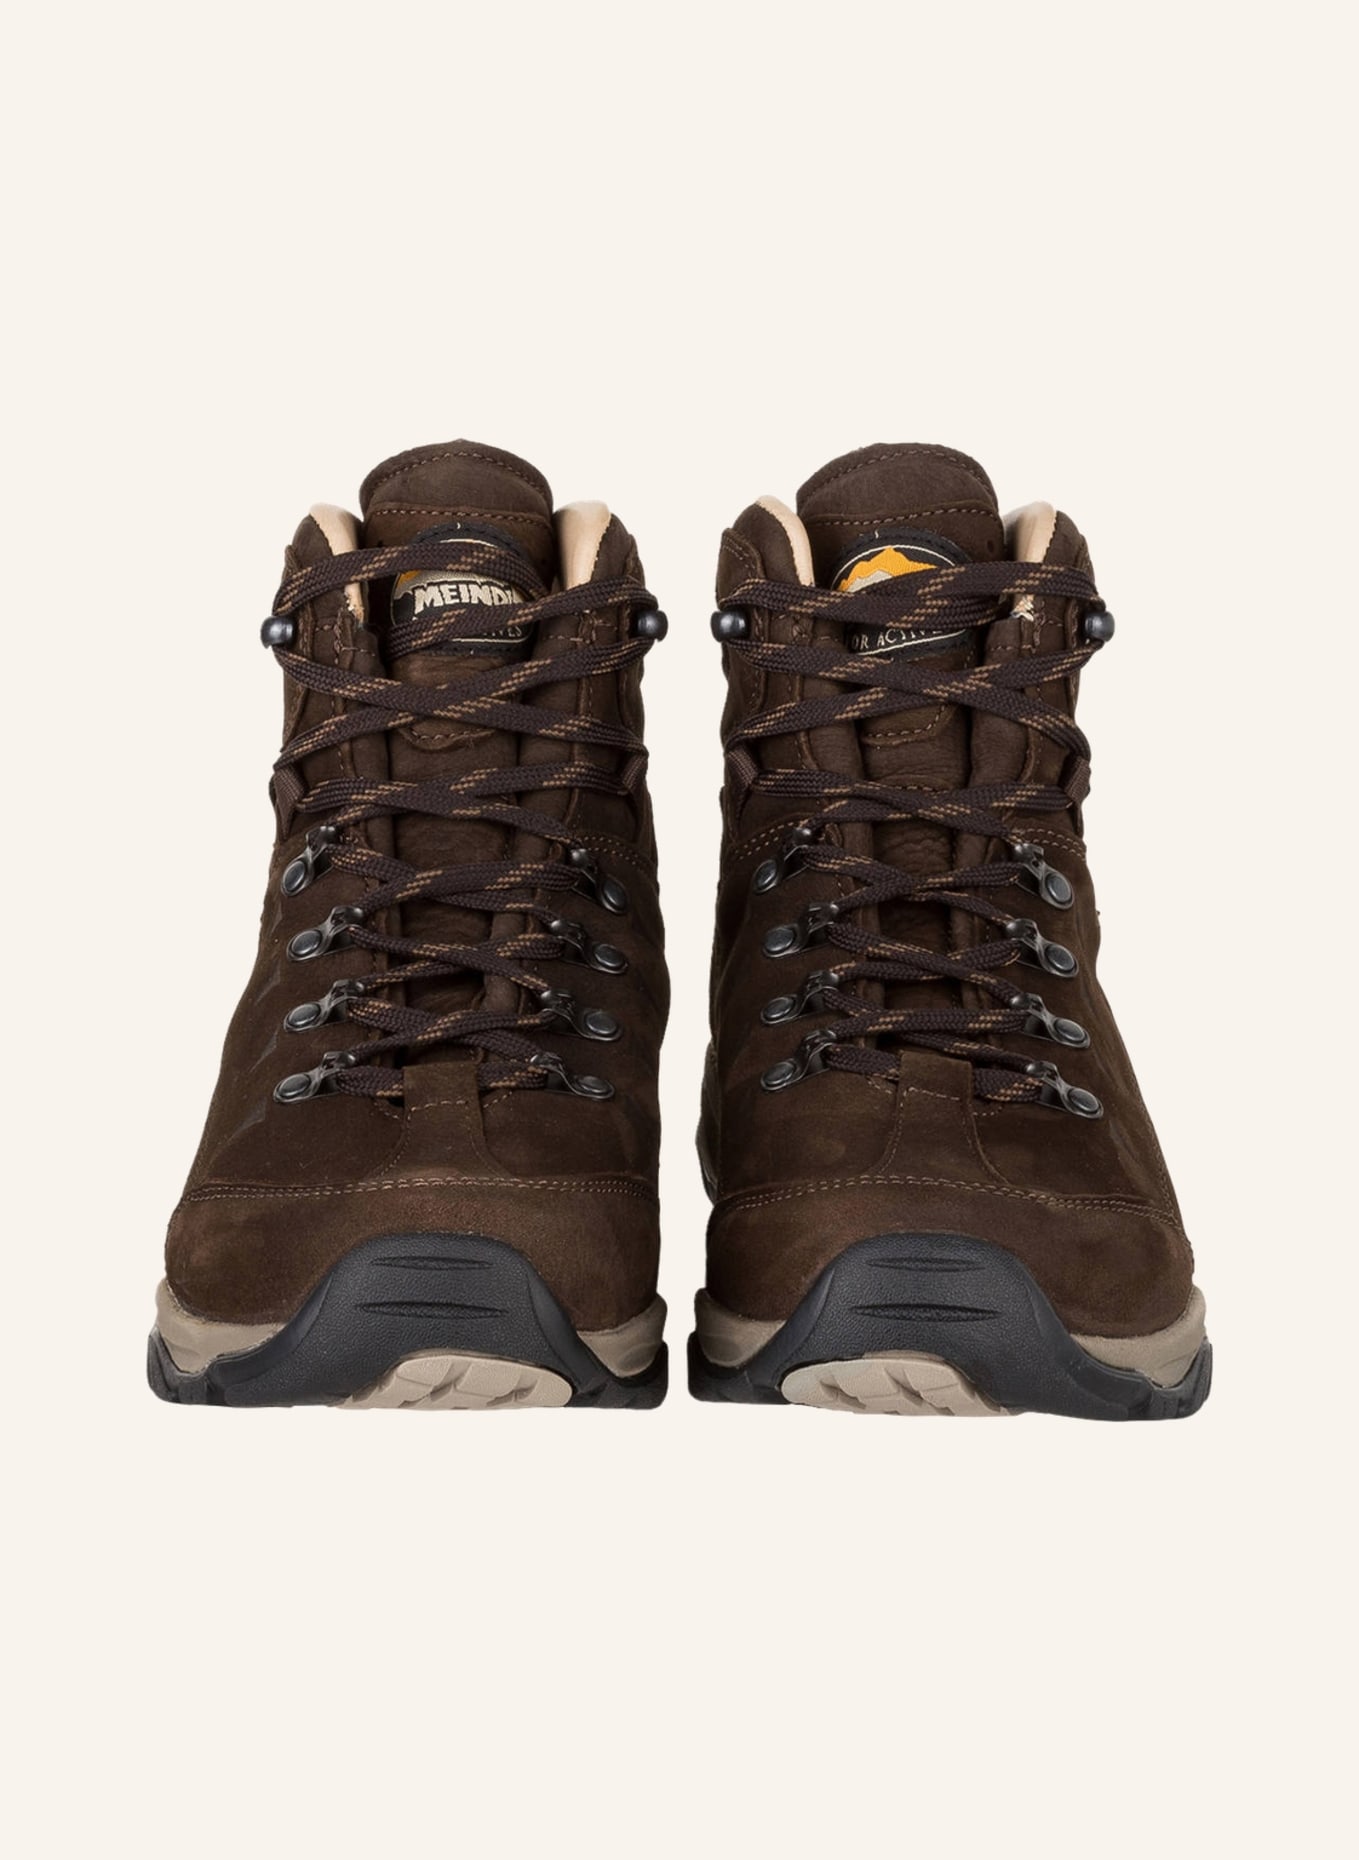 MEINDL Outdoor shoes OHIO 2 GTX, Color: BROWN (Image 3)